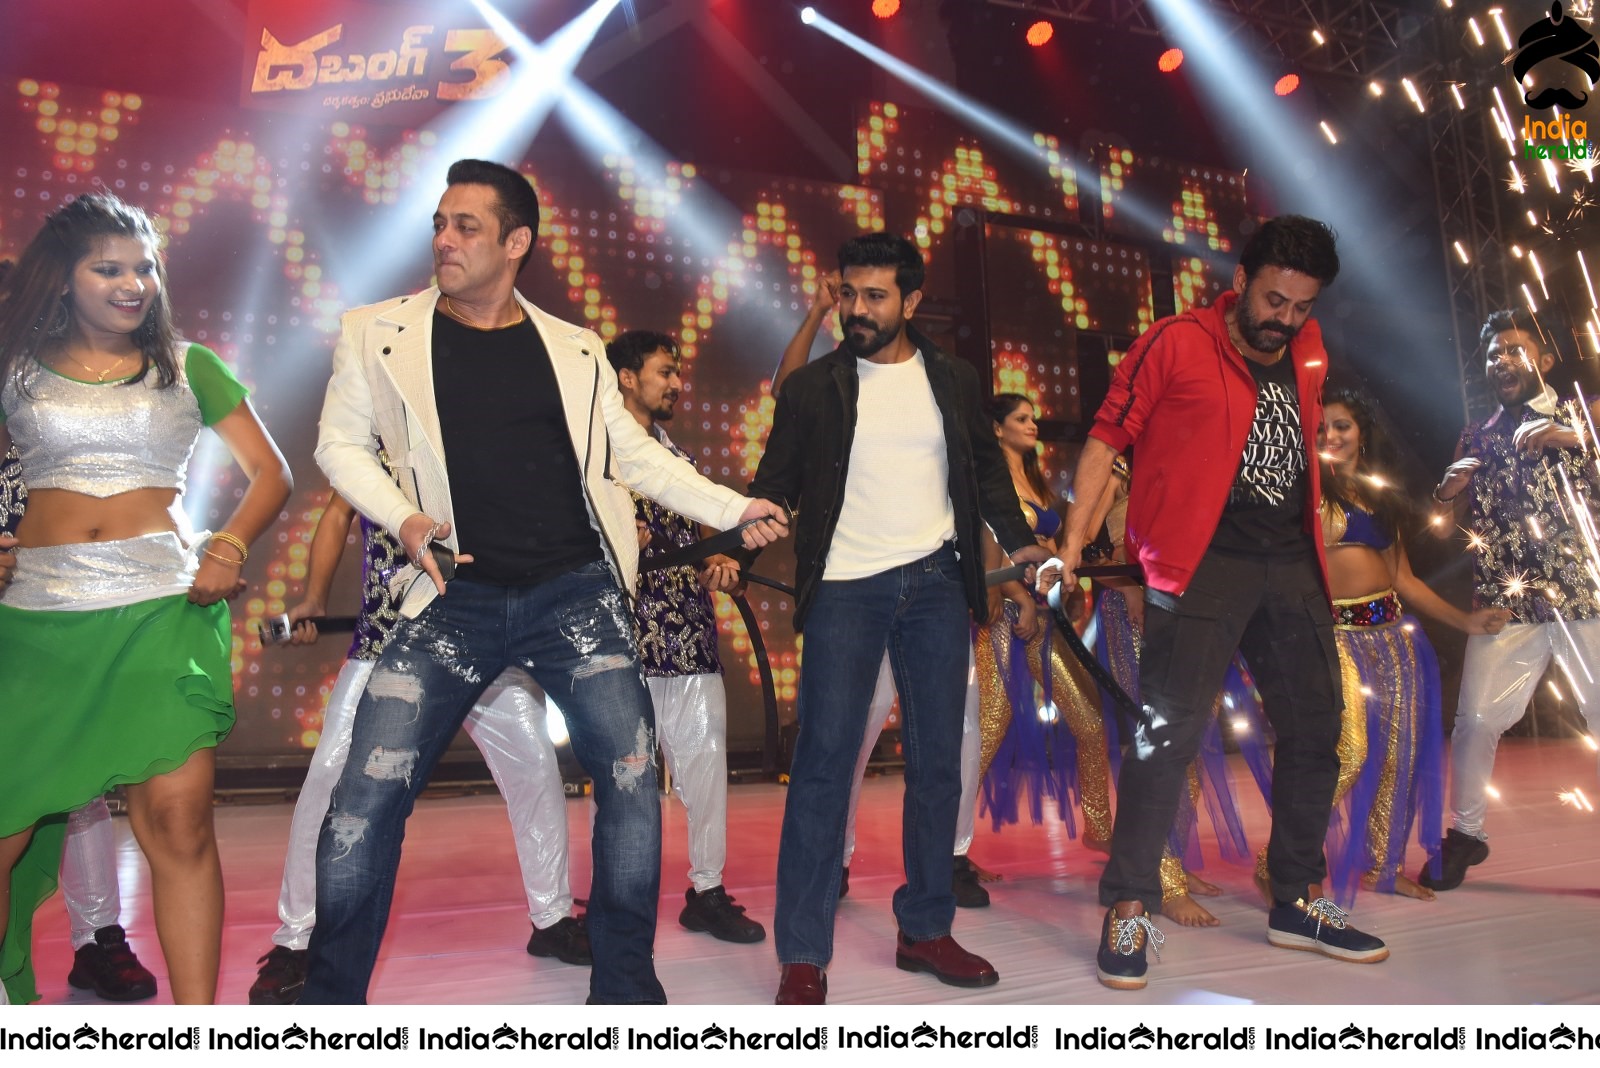 When Salman danced along with Tollywood Top Stars at Dabangg Event Set 1